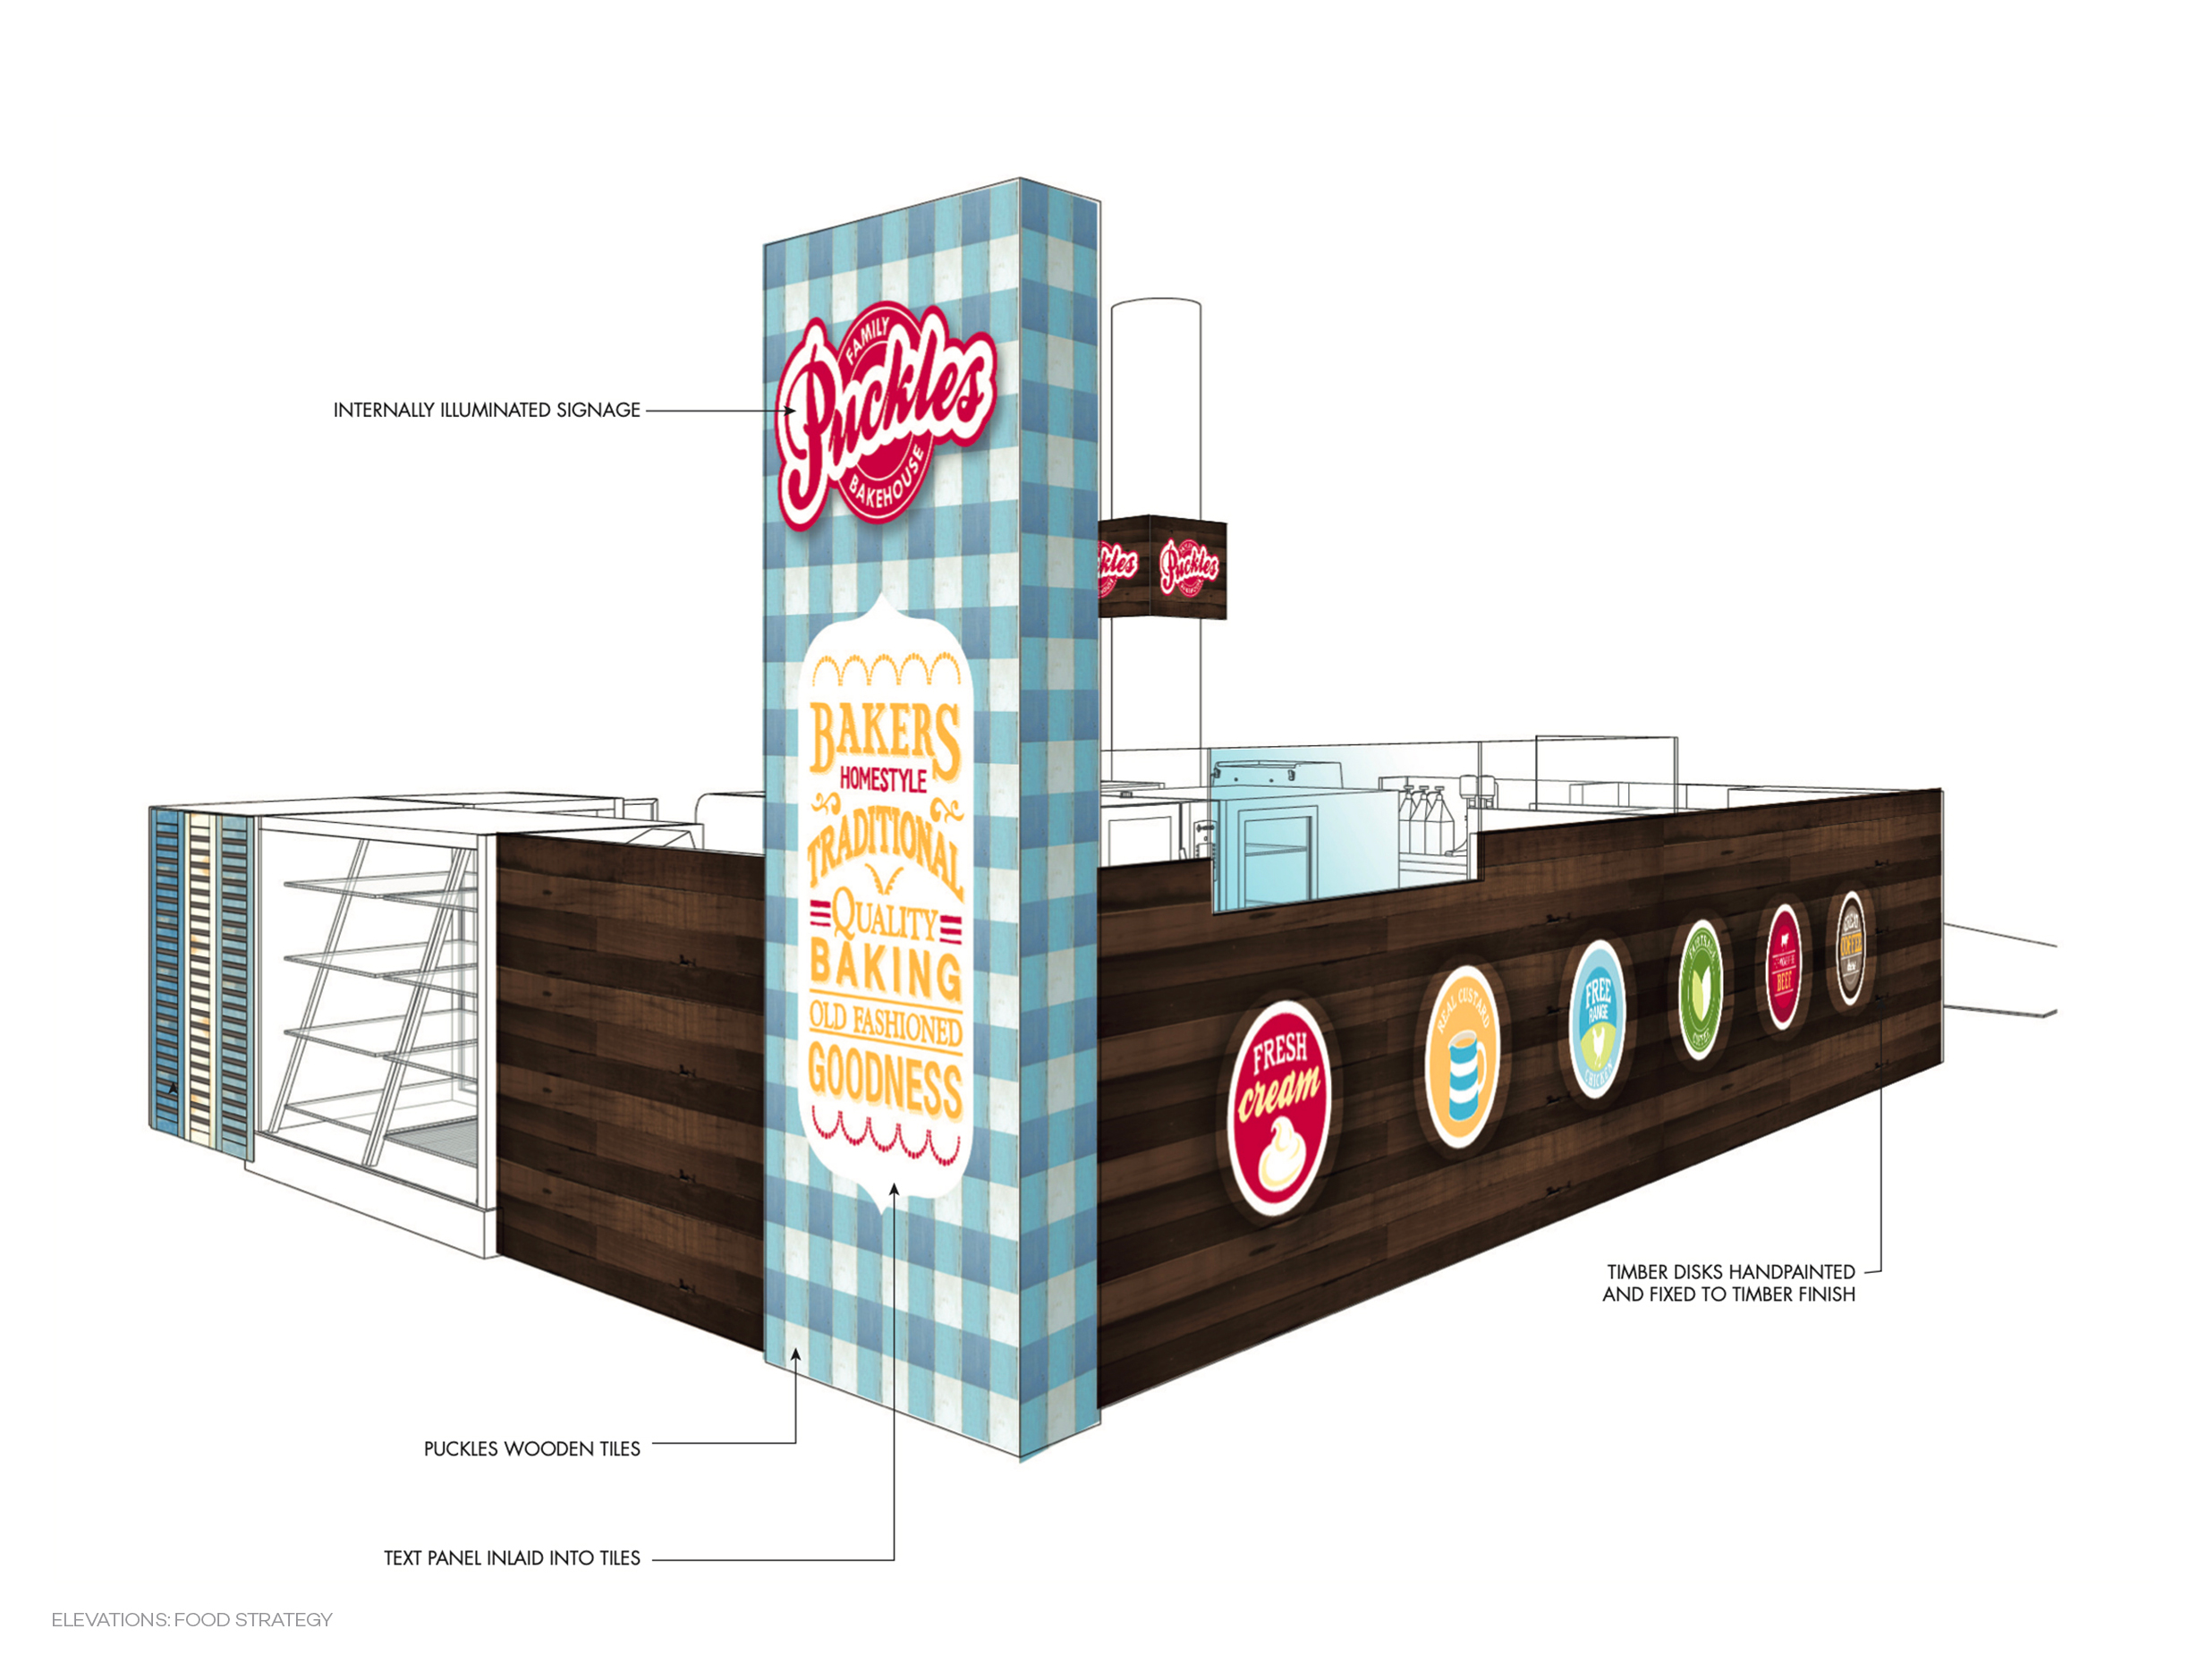 Elevation of graphic design applied to Puckles kiosk design